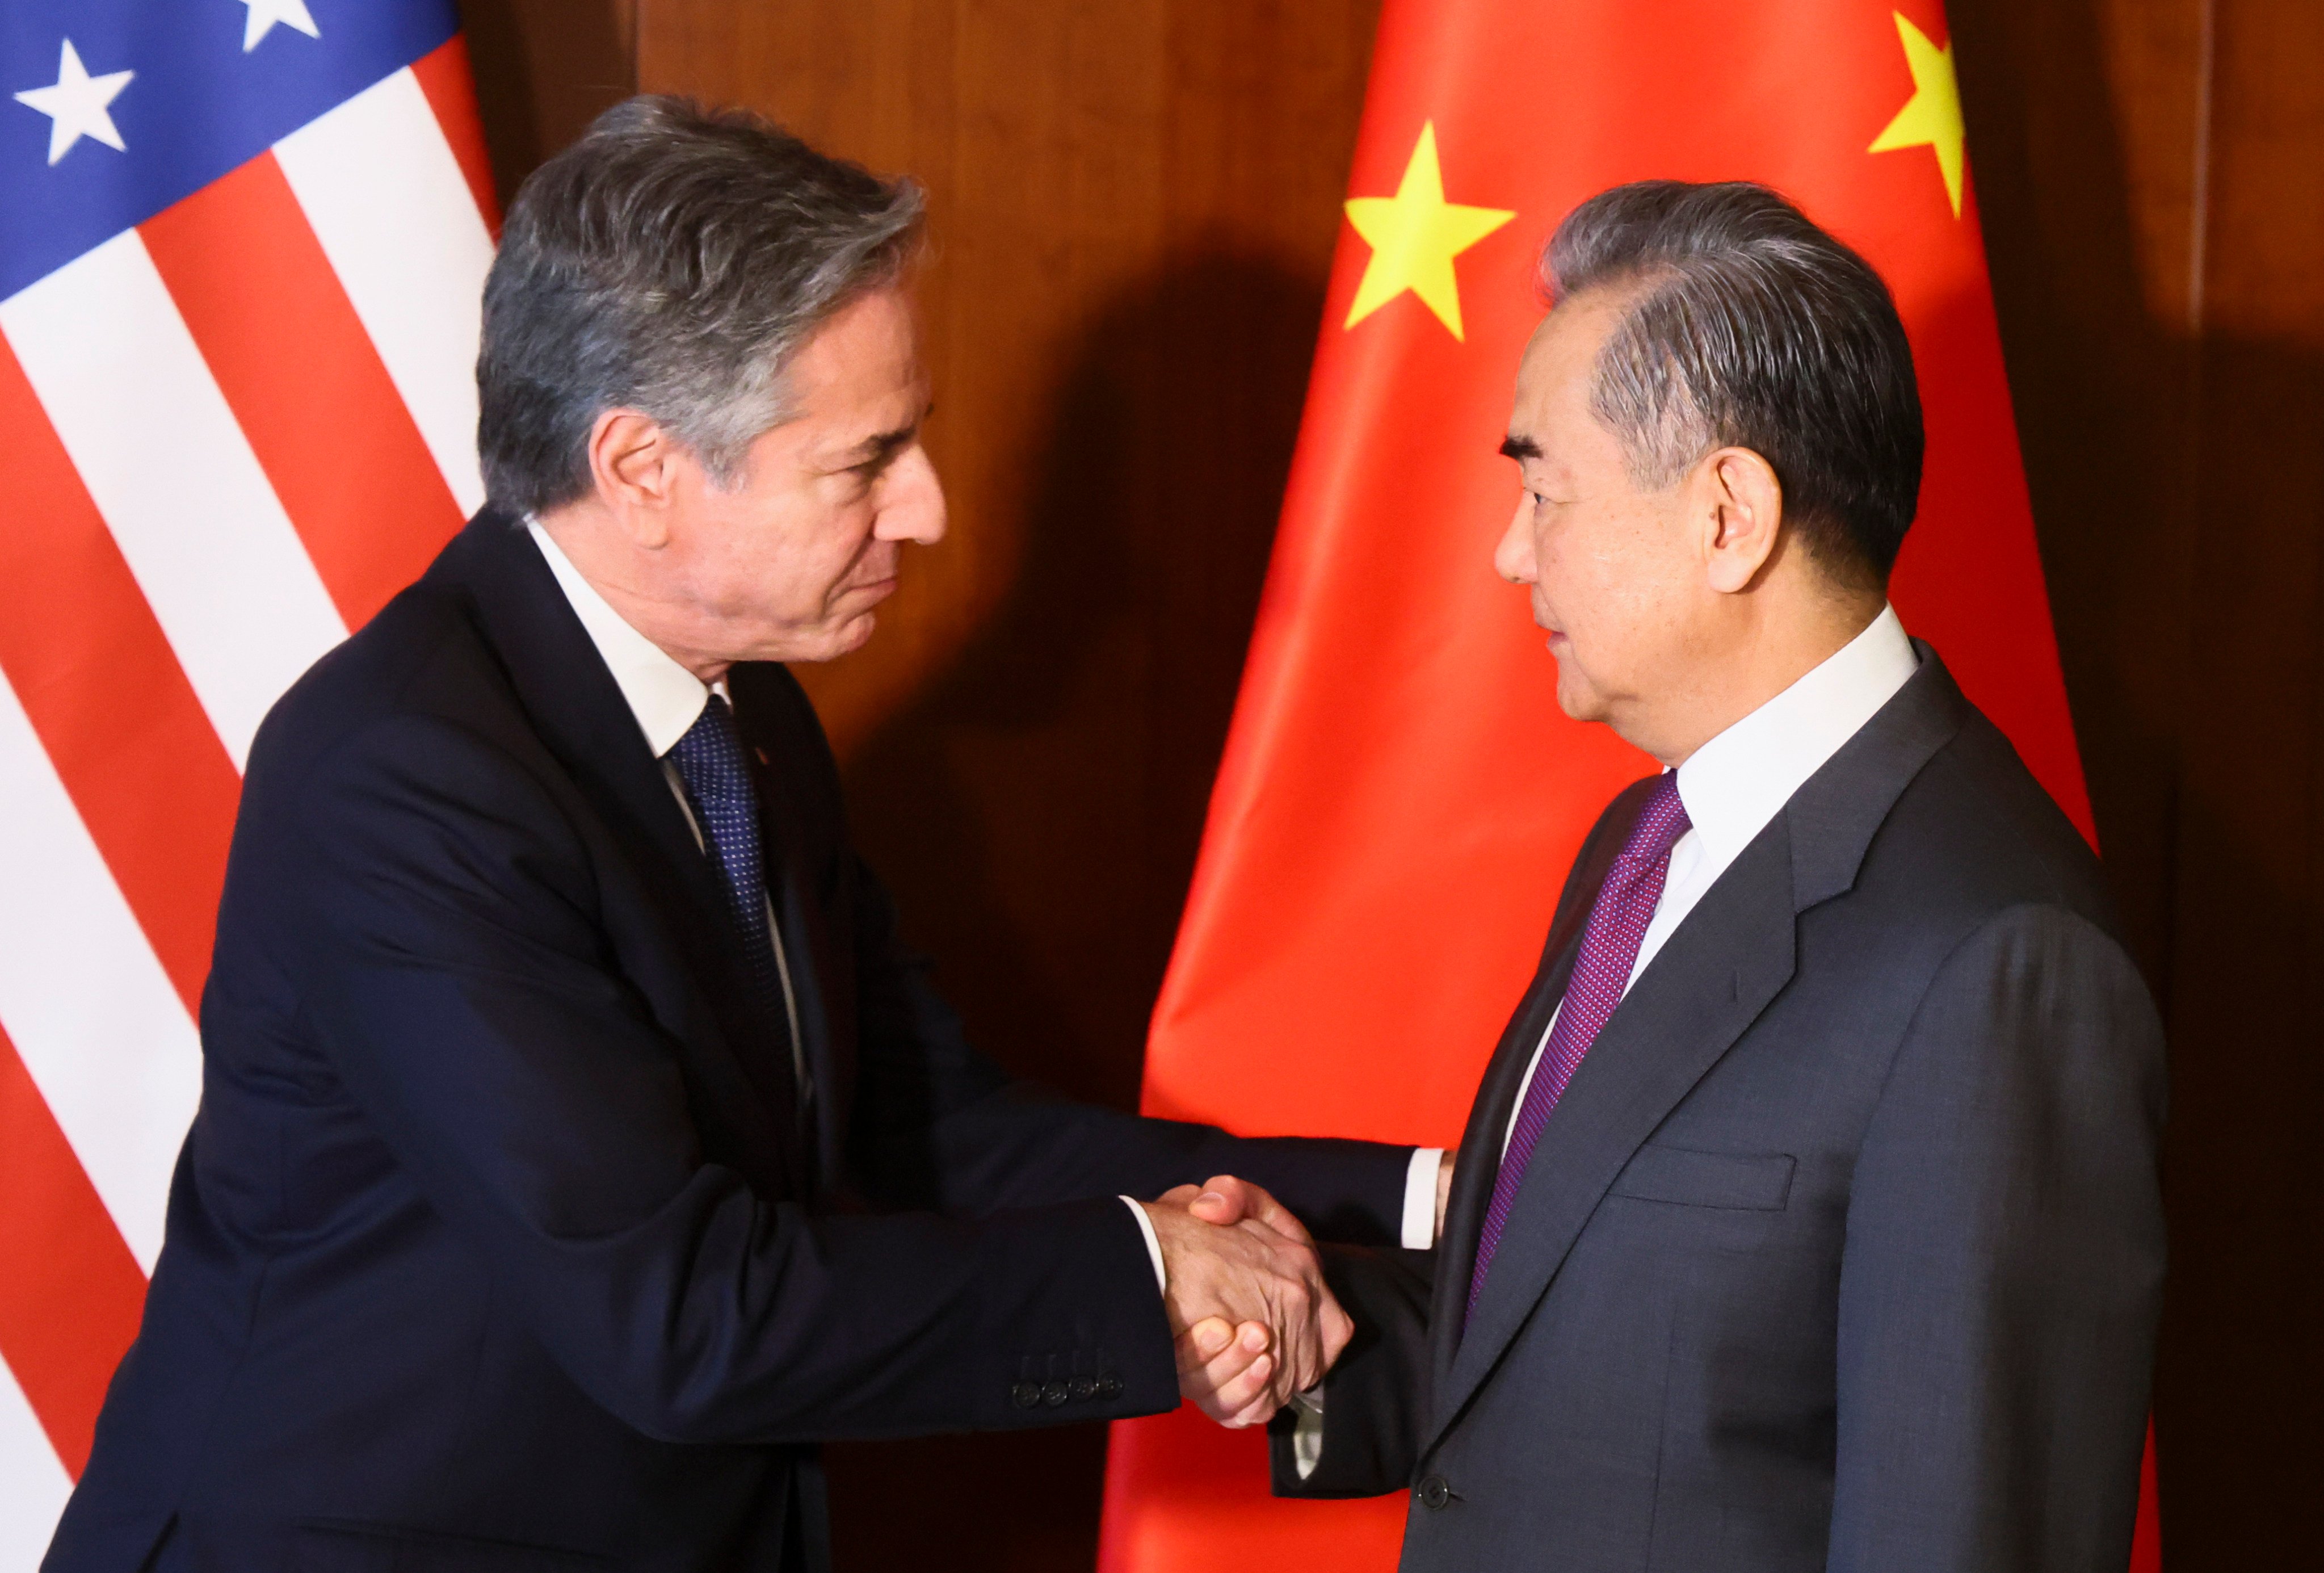 US Secretary of State Antony Blinken and Chinese Foreign Minister Wang Yi pictured during their recent meeting in Munich. Photo: AP